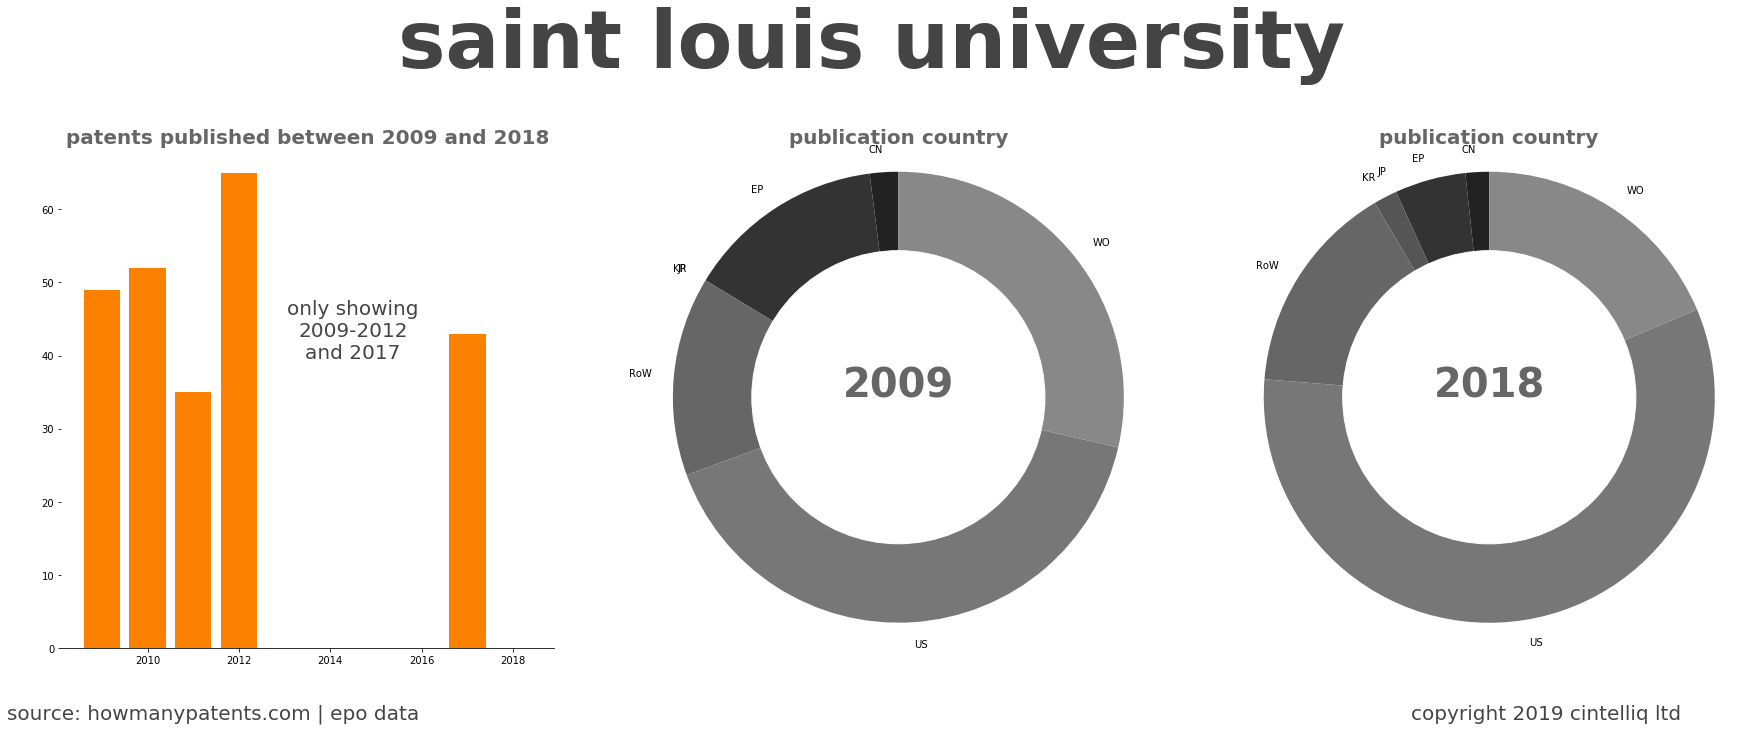 summary of patents for Saint Louis University